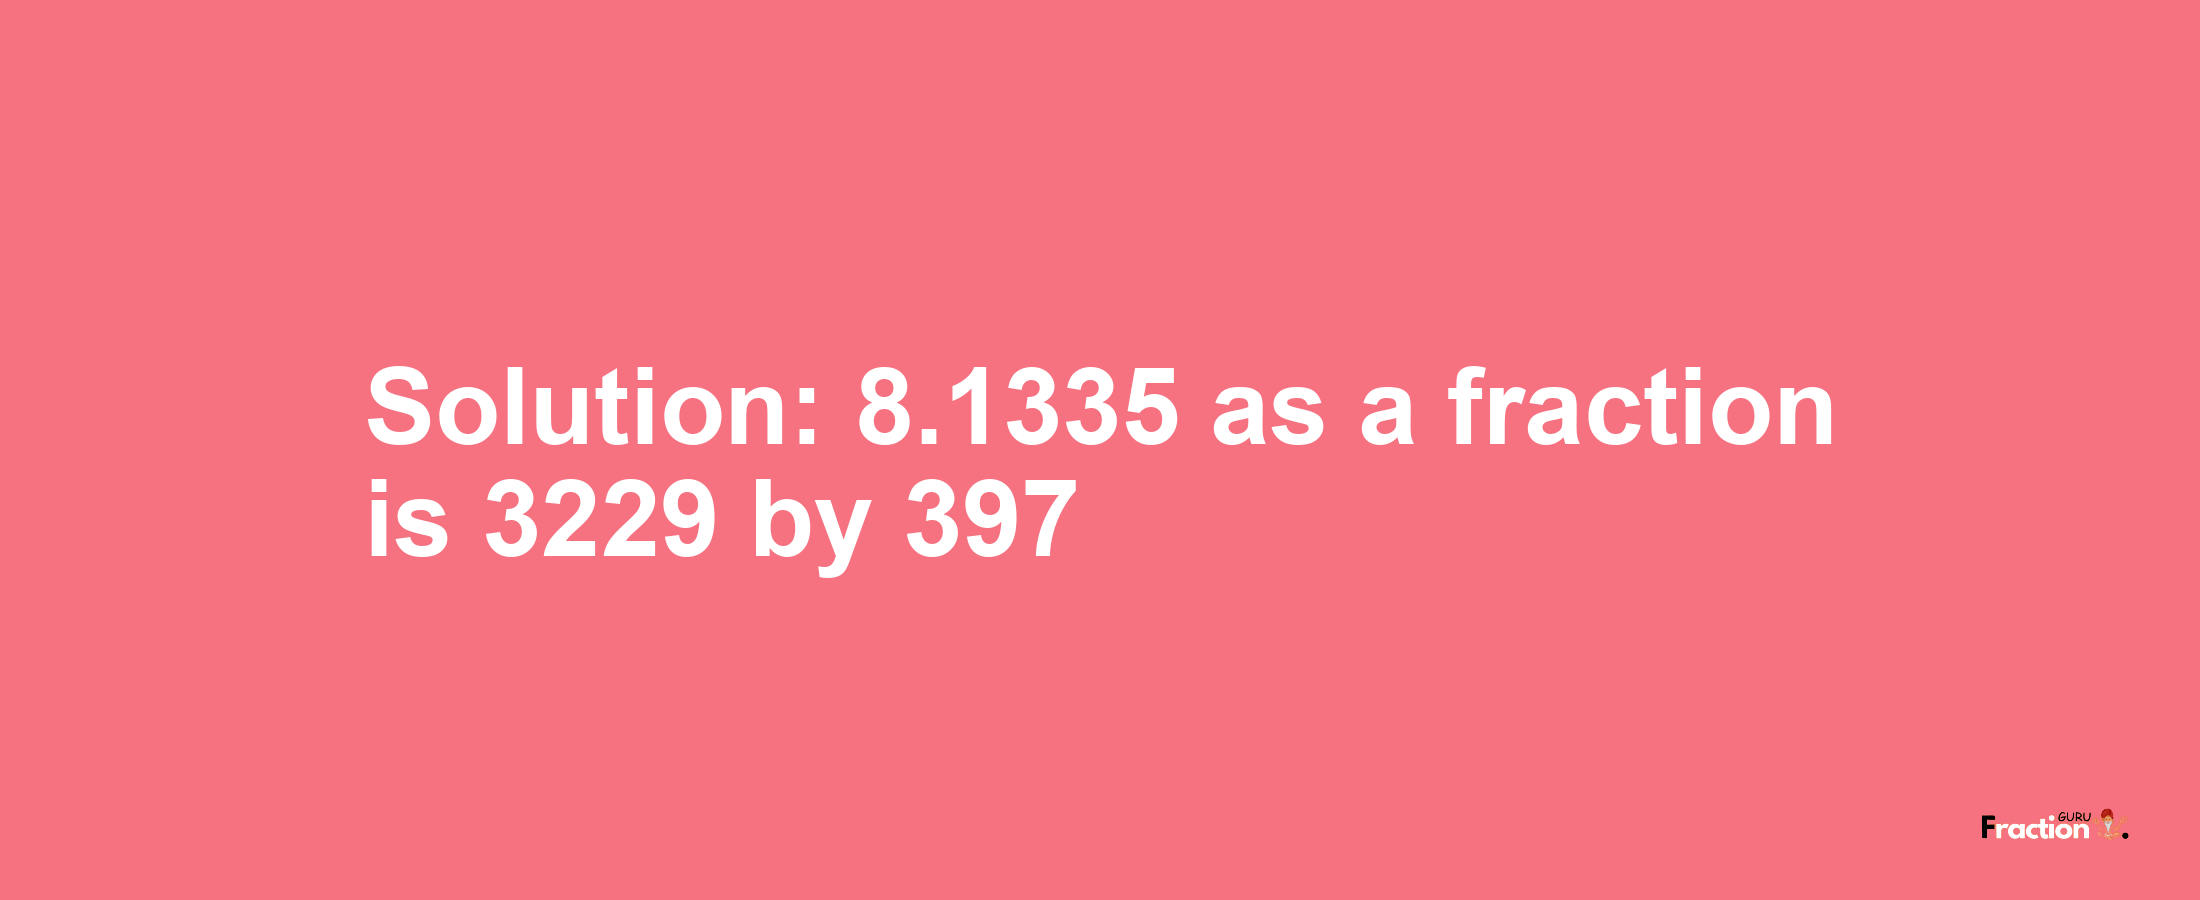 Solution:8.1335 as a fraction is 3229/397